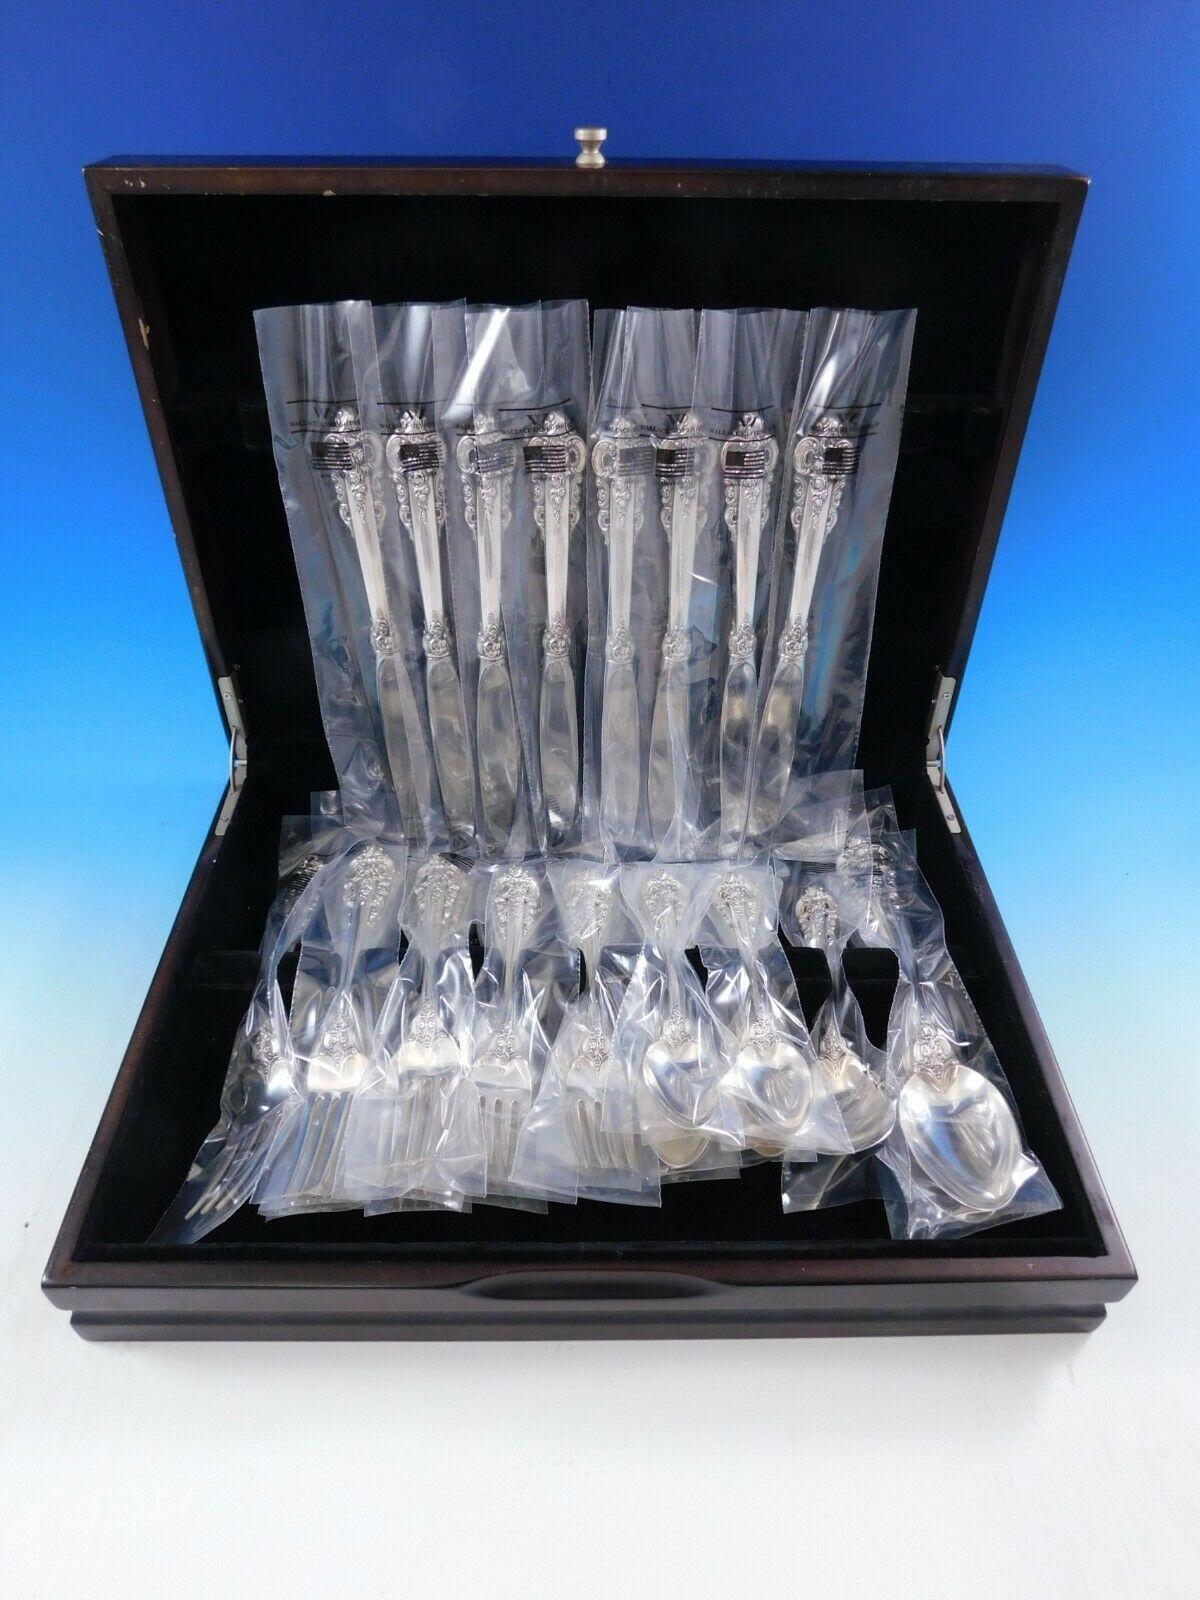 Unused Grande Baroque by Wallace sterling silver flatware set - 36 Pieces. This set includes:

8 knives, 9